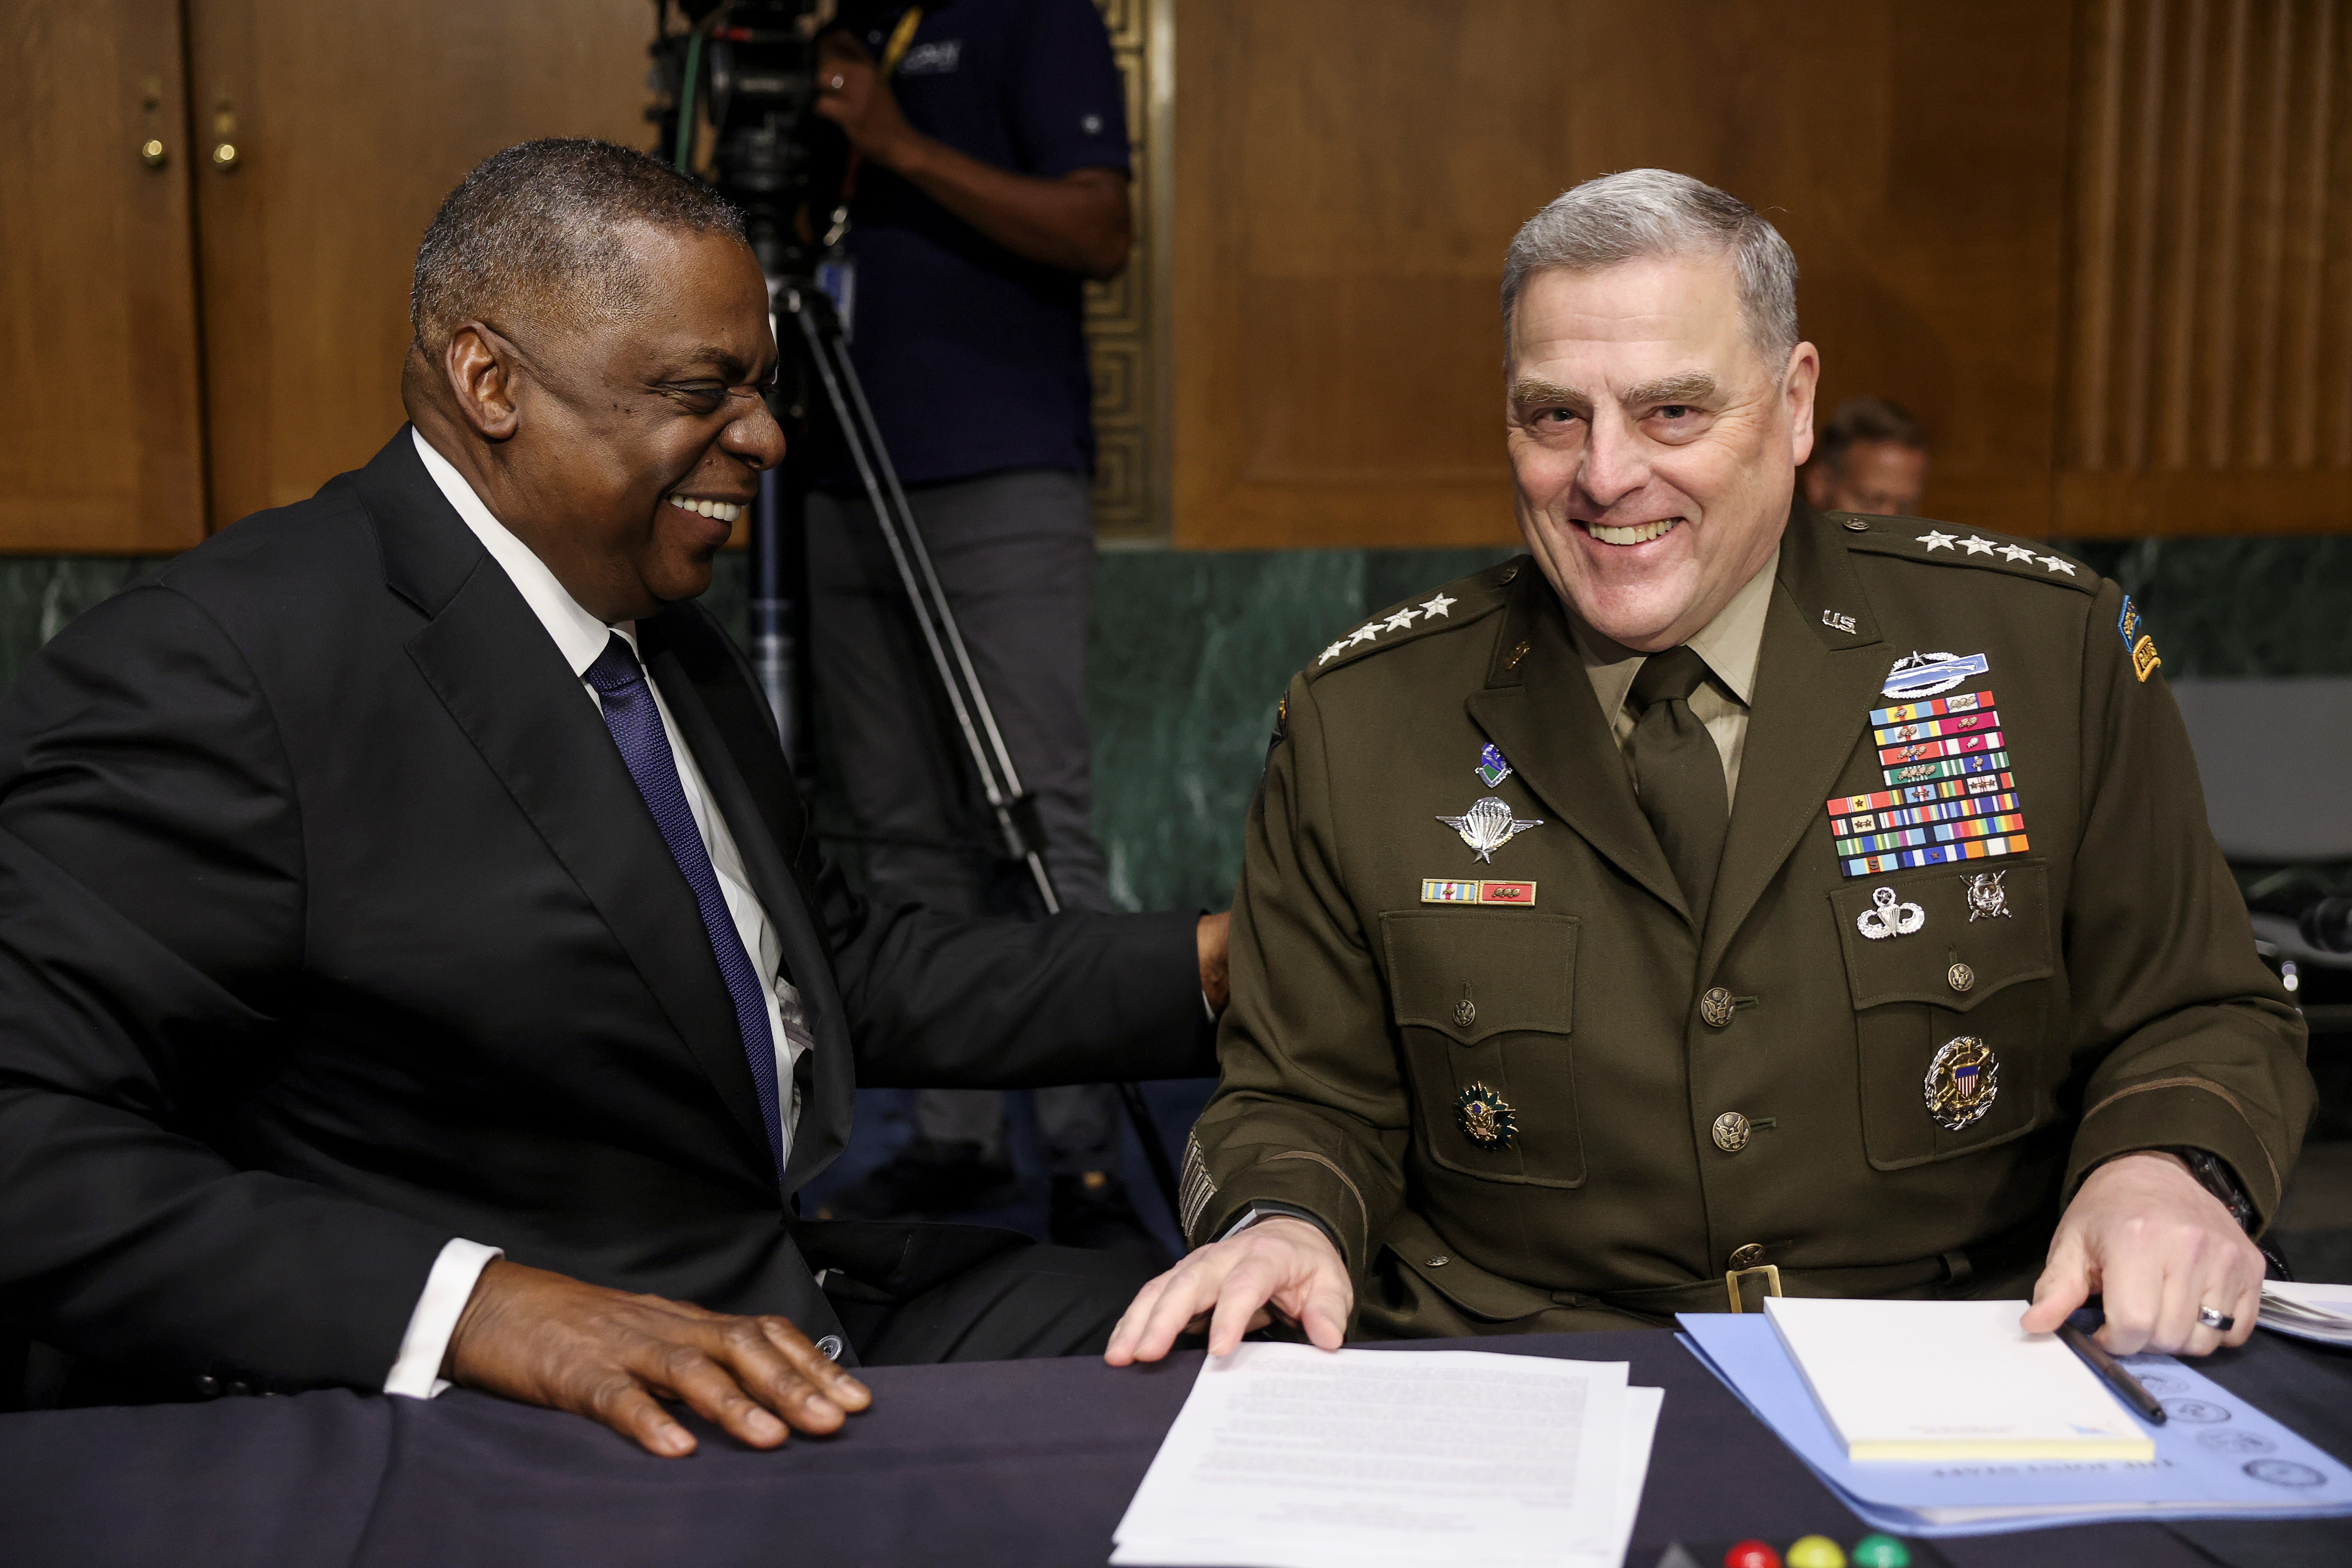 U.S. Defense Secretary Lloyd Austin laughs with Joint Chiefs of Staff Chair Gen. Mark Milley during a break in a Senate Appropriations Committee hearing on the defense department’s budget on Capitol Hill in Washington, U.S., June 17, 2021.